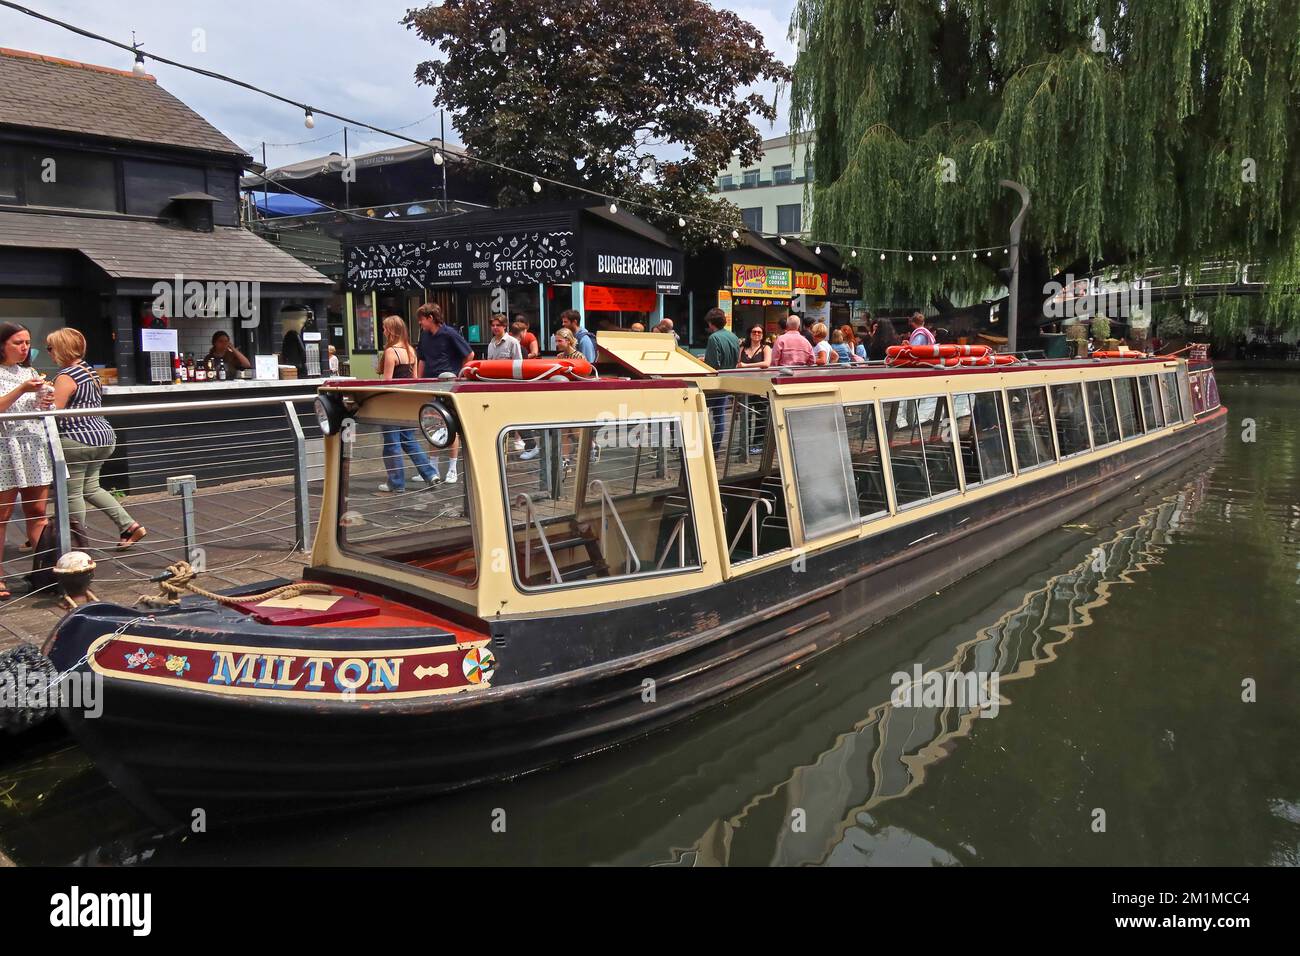 Milton waterbus at Camden Locks, canal, boats and market, Lock Place, Camden, London, England, UK, NW1 8AF Stock Photo